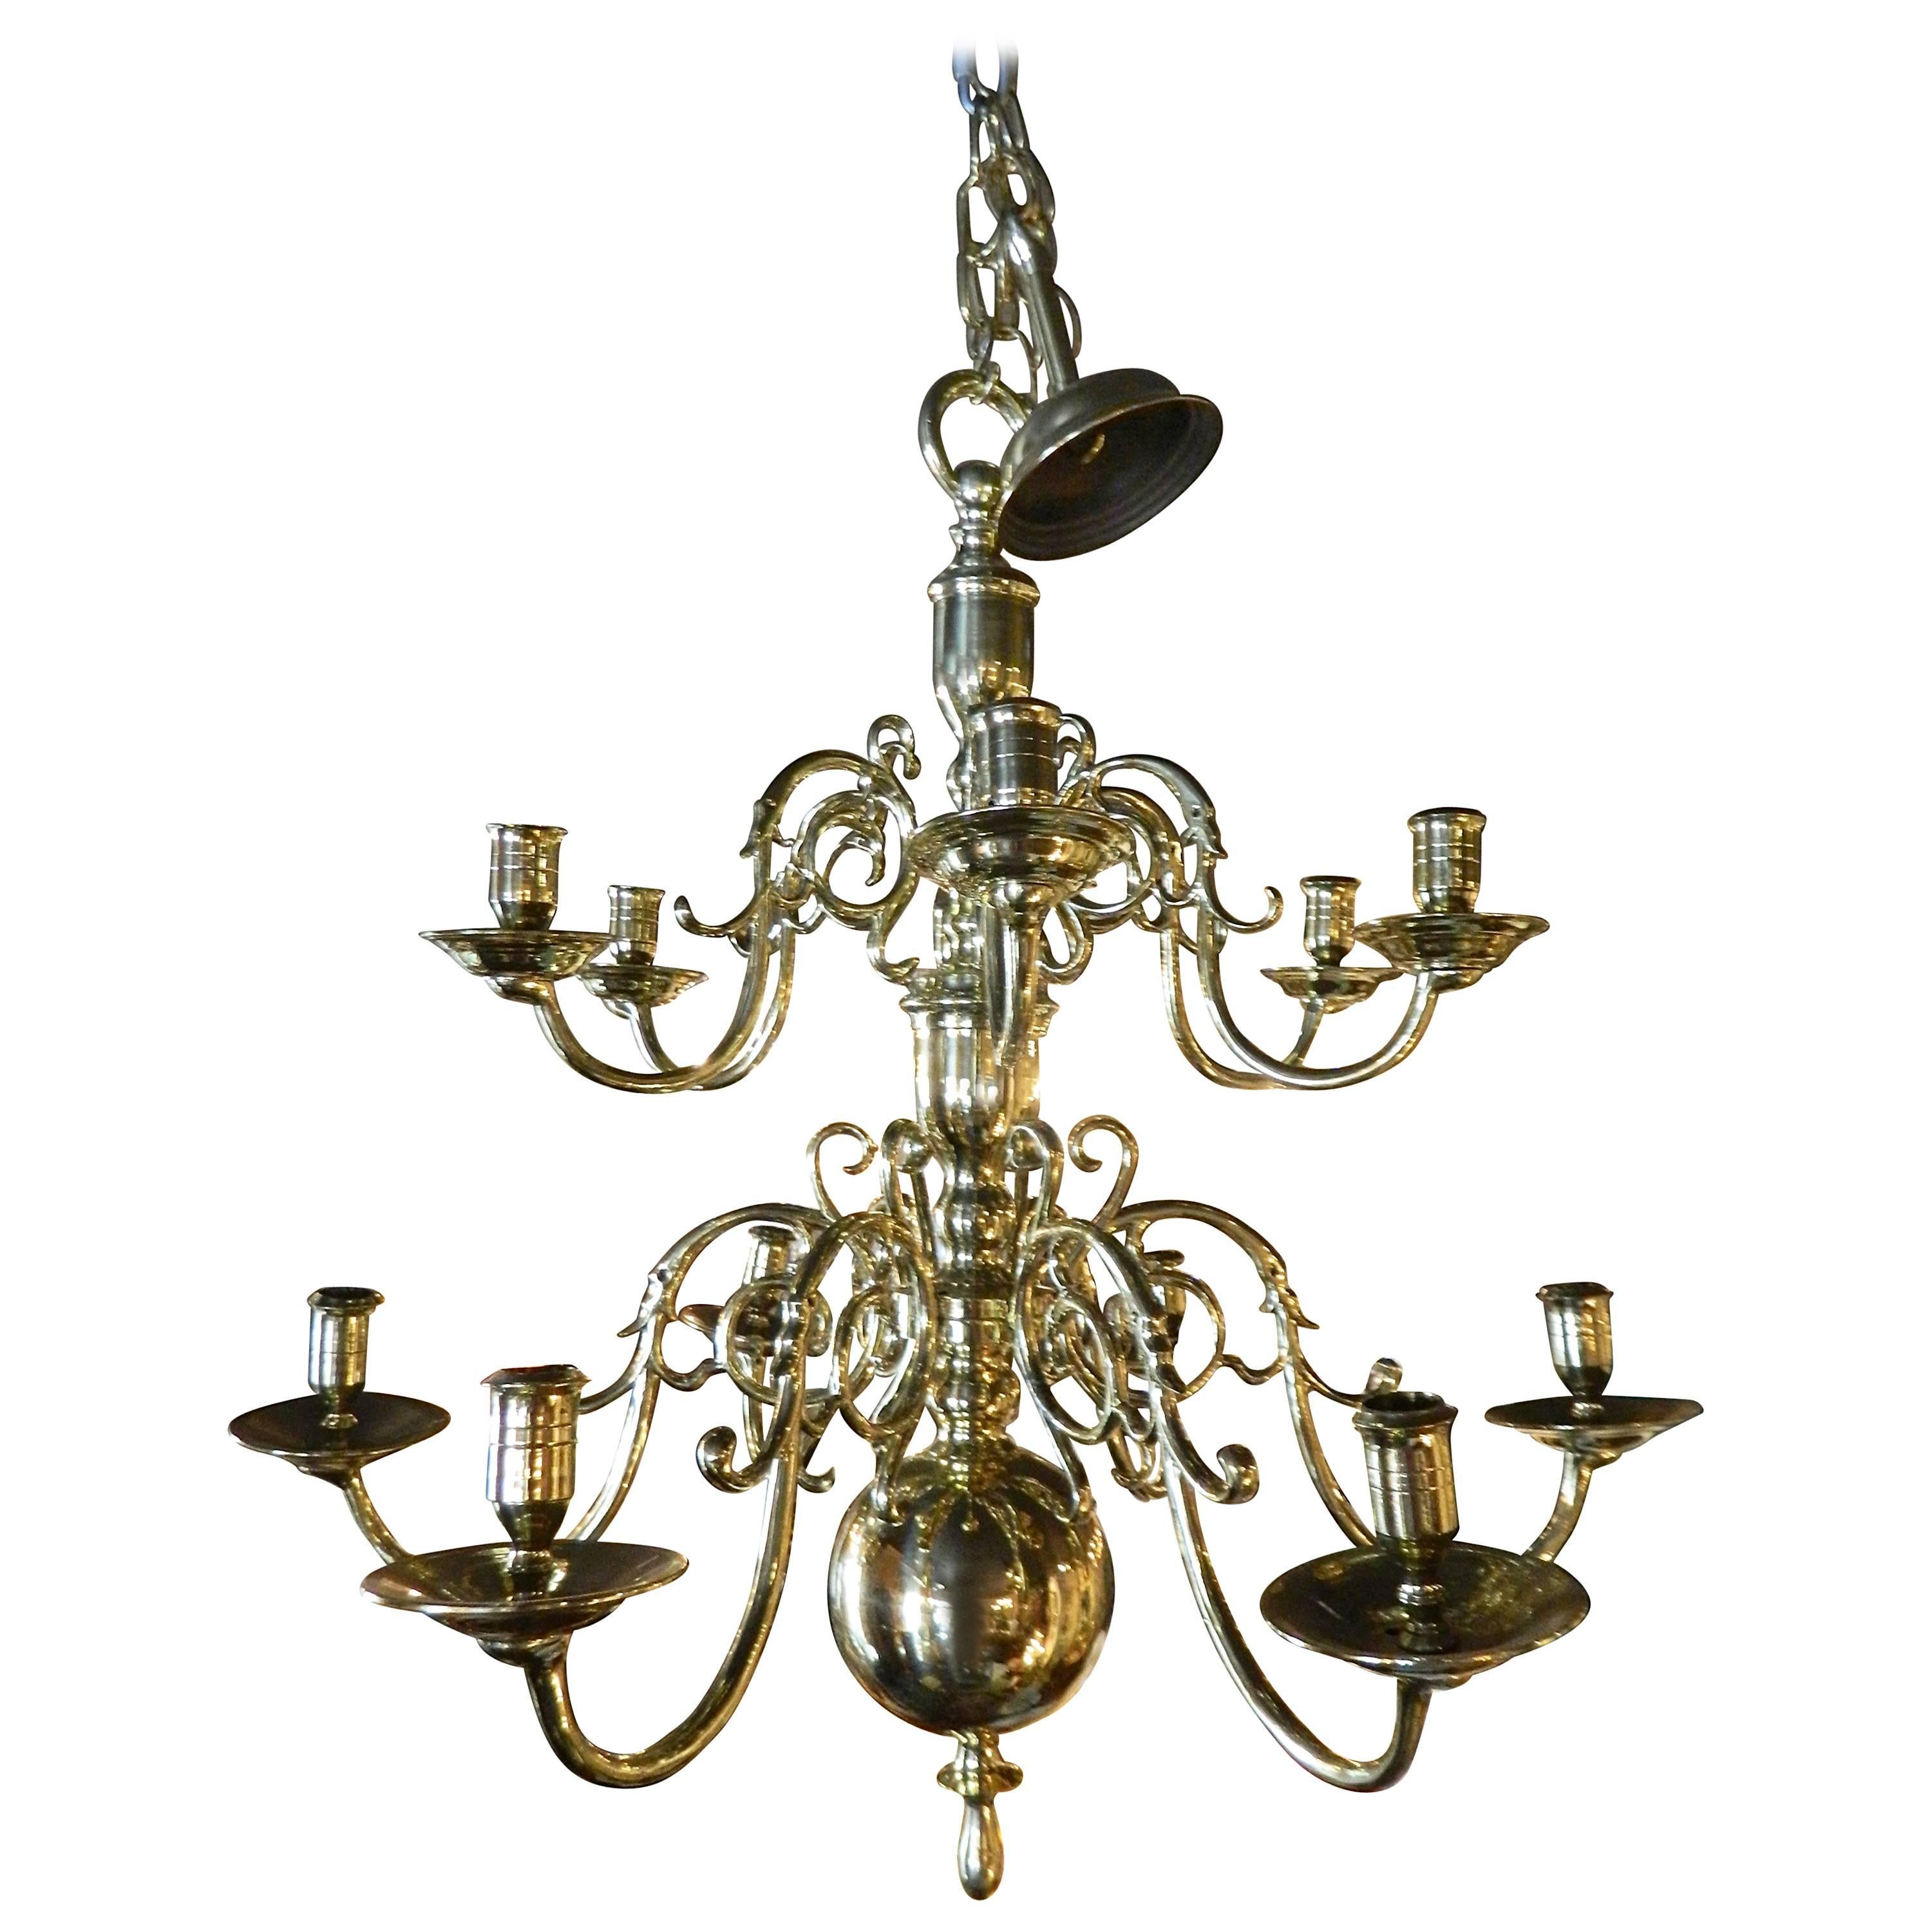 French Polished Brass Two-Tier Ball Chandelier, 19th Century For Sale